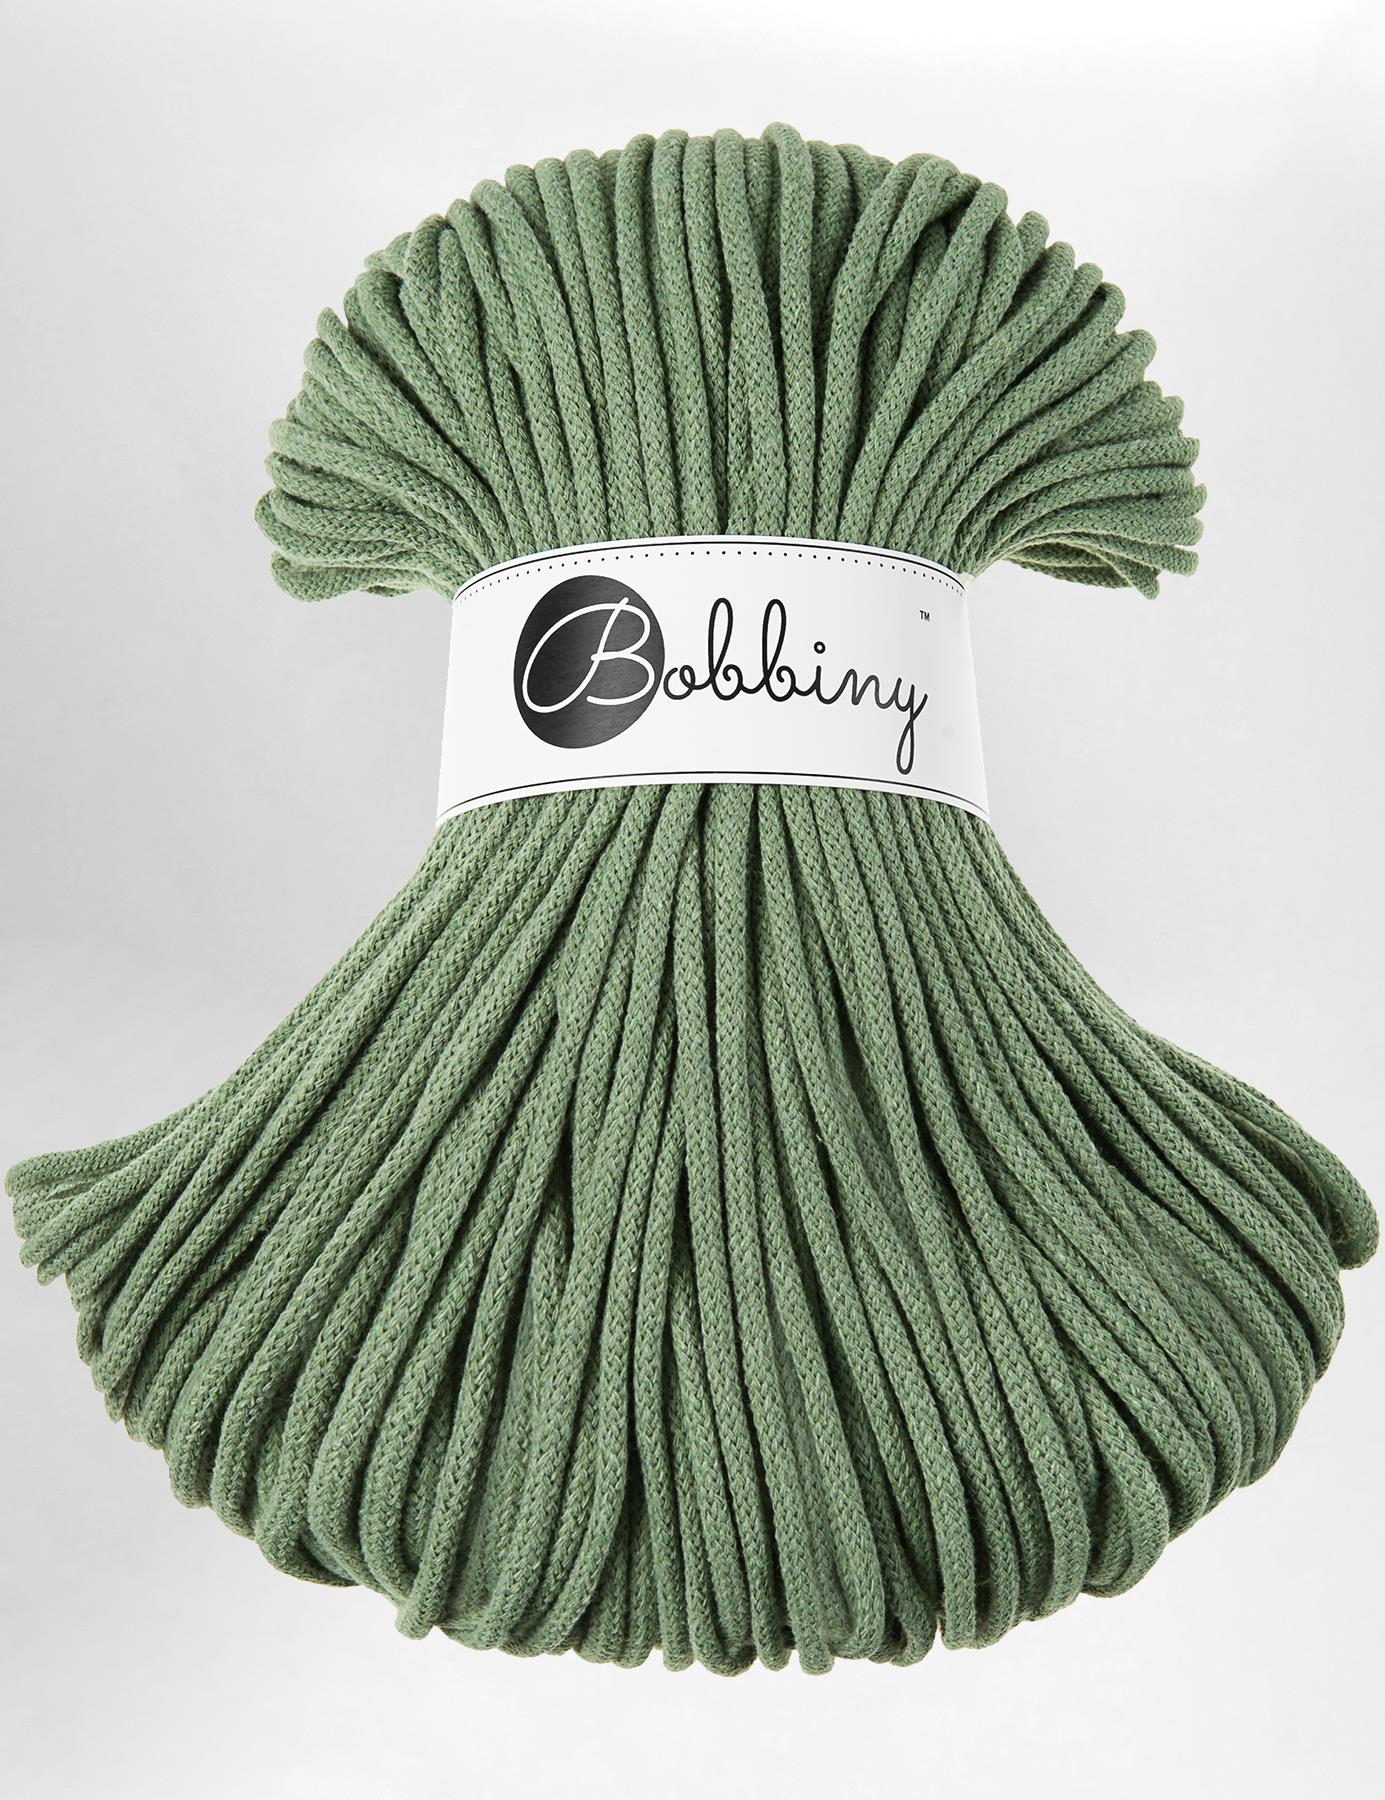 5mm Eucalyptus Green recycled cotton macrame cord by Bobbiny (100m)